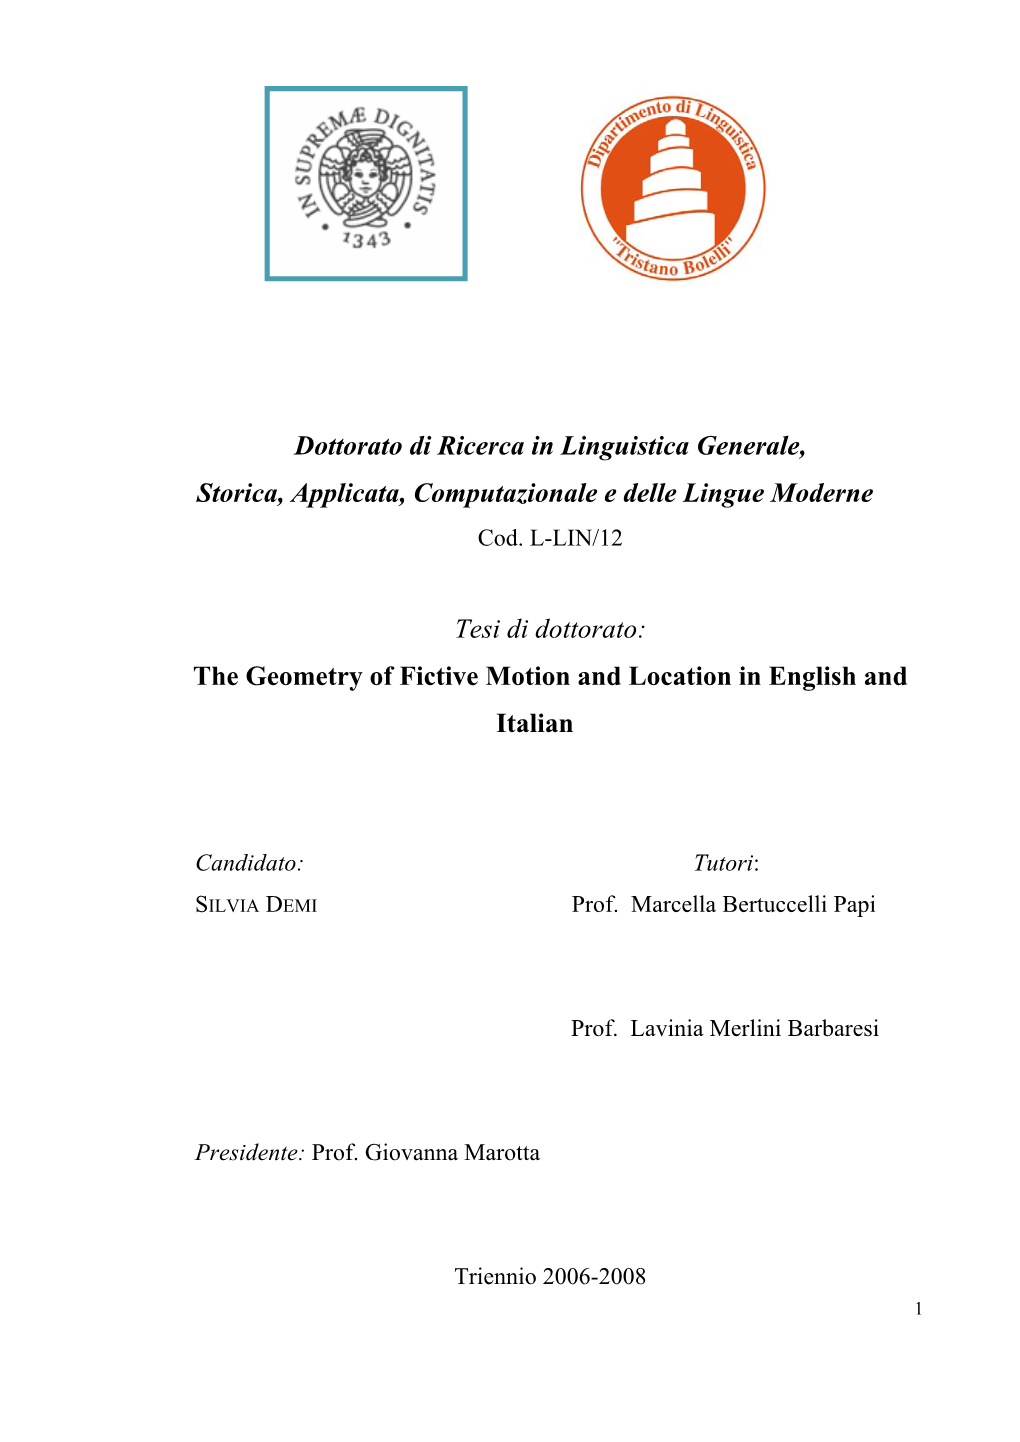 The Geometry of Fictive Motion and Location in English and Italian